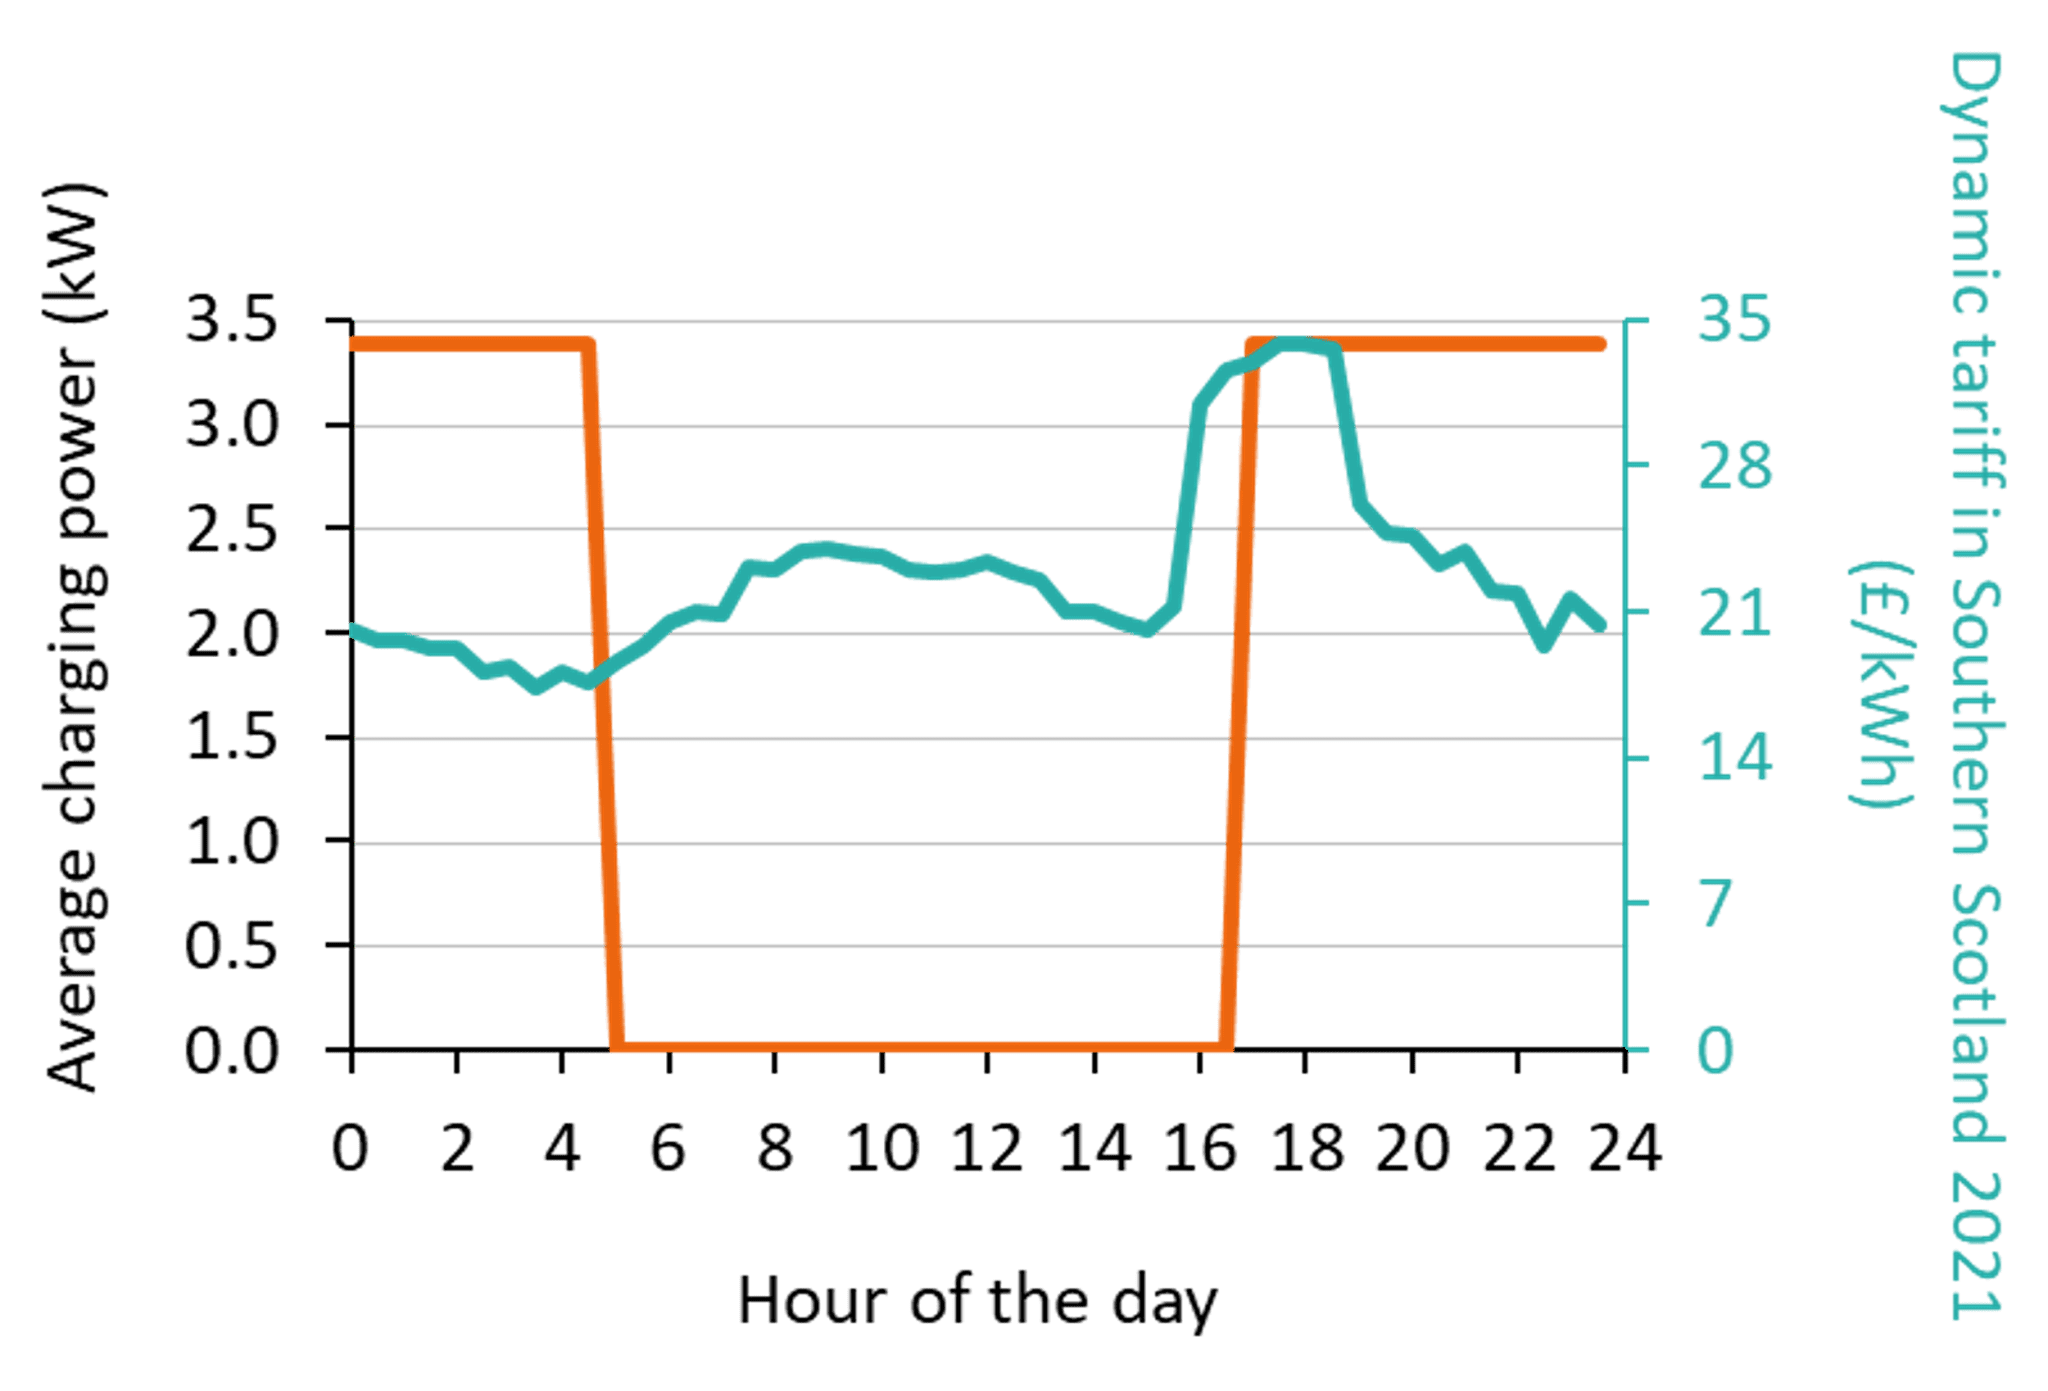 The chart shows the average charging profile of an urban truck (orange line corresponding to the left y-axis) with a dynamic tariff (turquoise line corresponding to the right y-axis). 